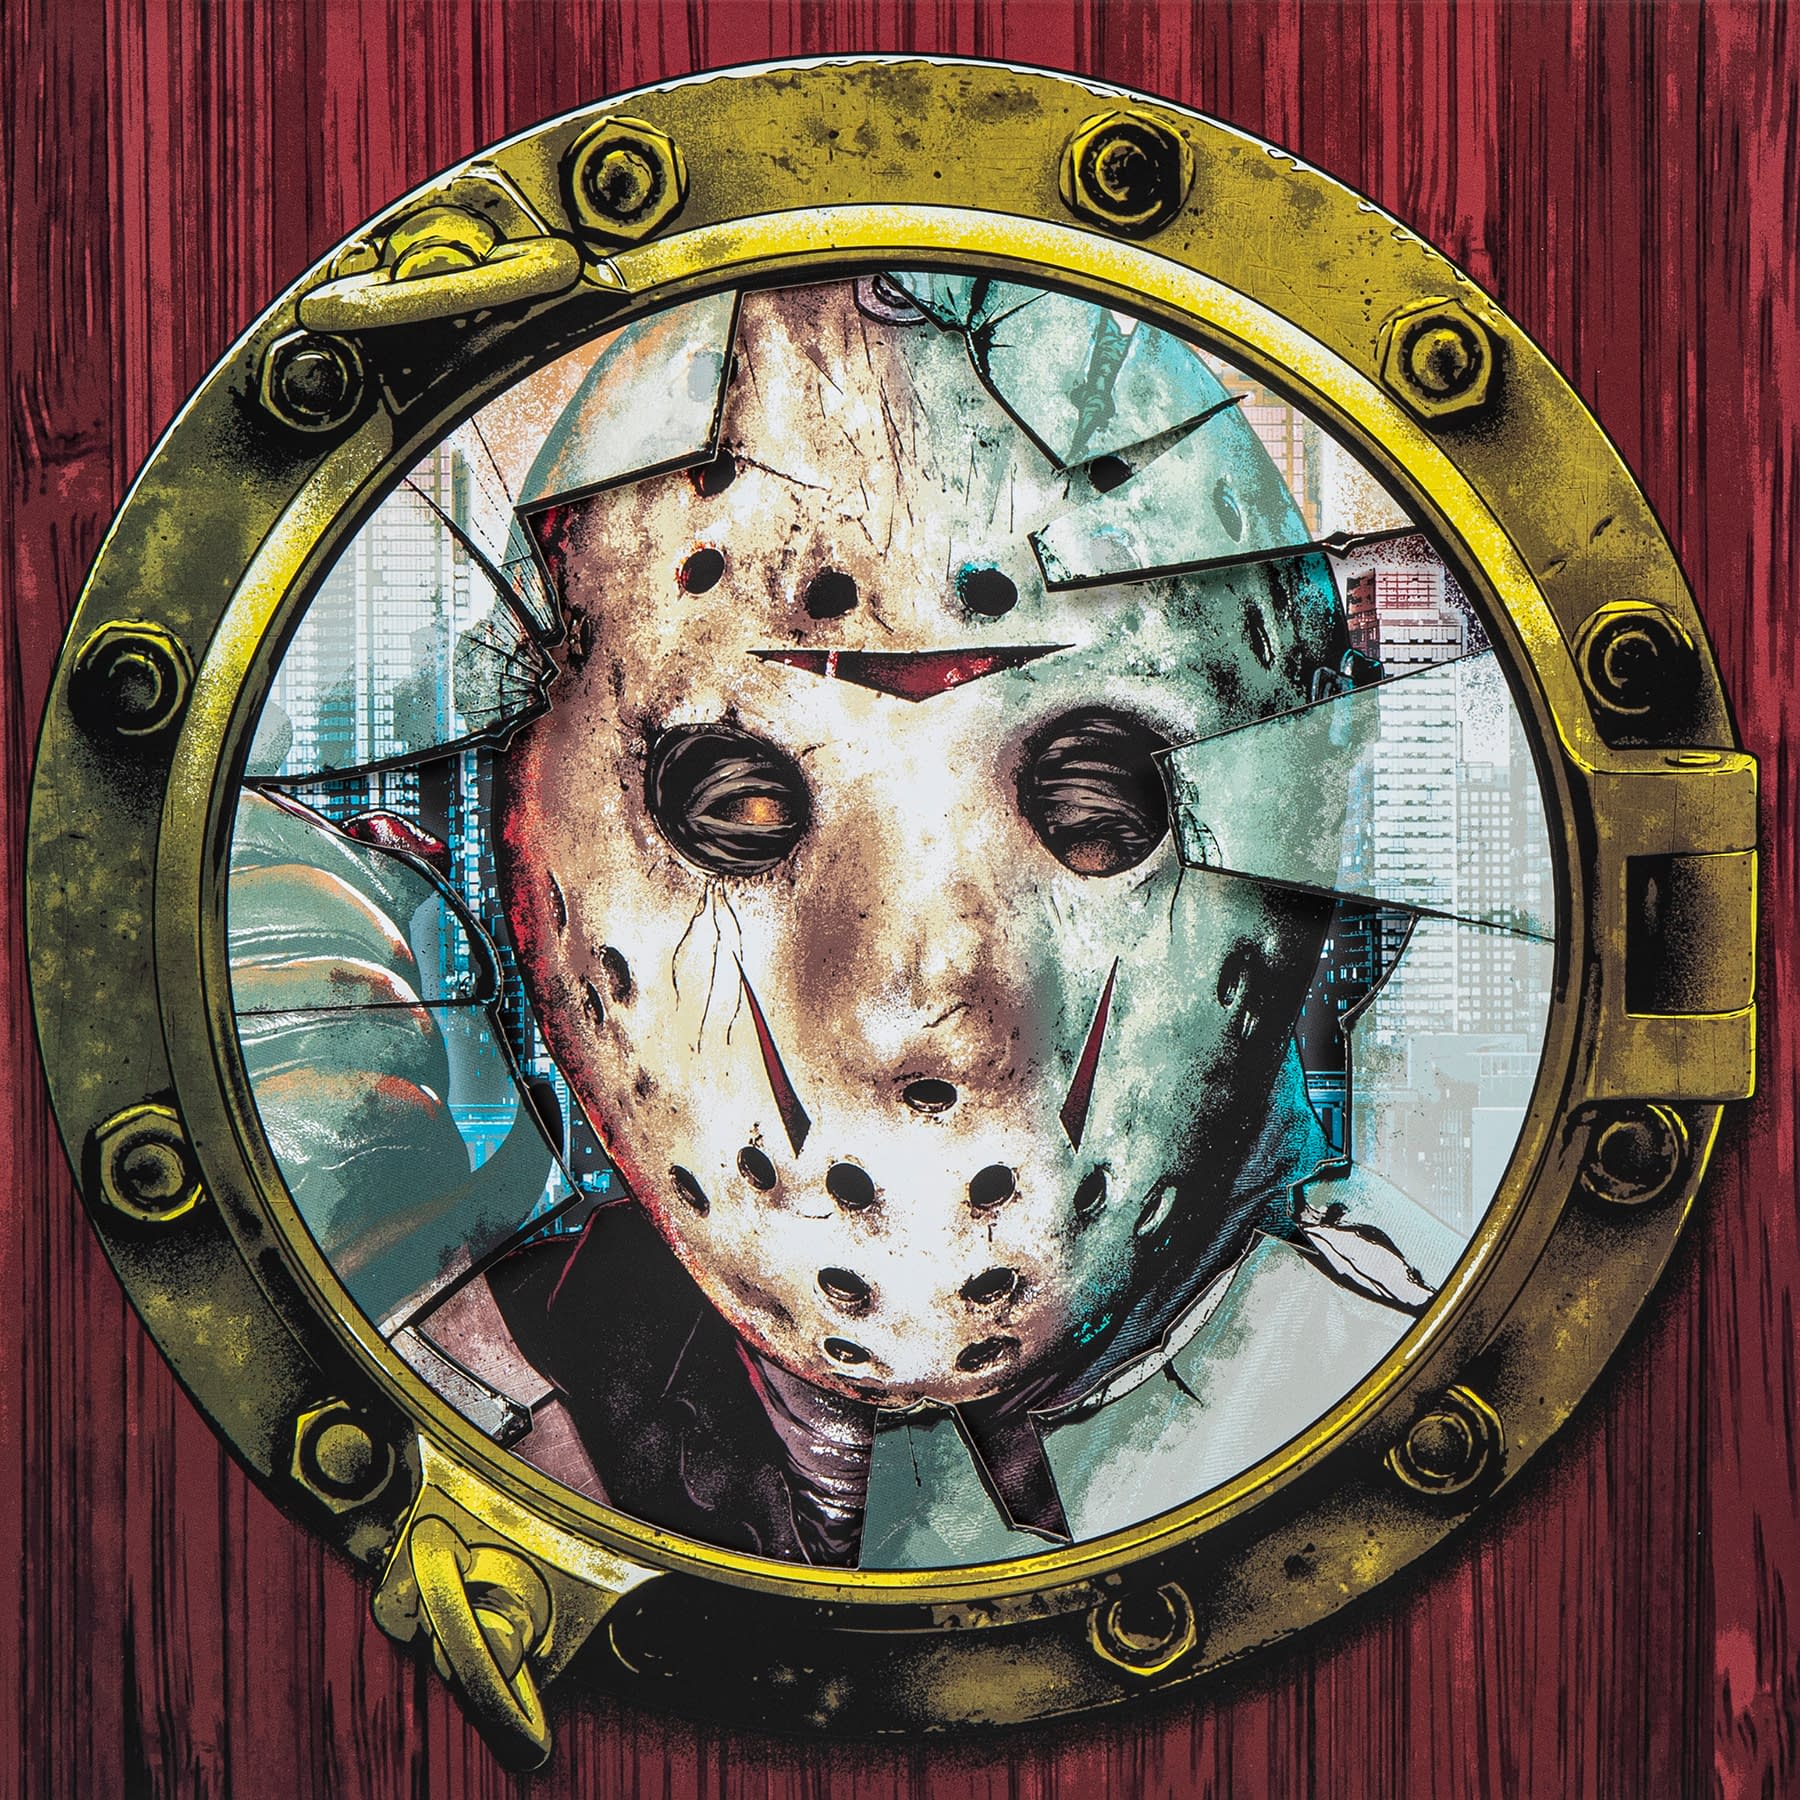 Friday The 13th Part 8 Vinyl Soundtrack Available Now From Waxwork